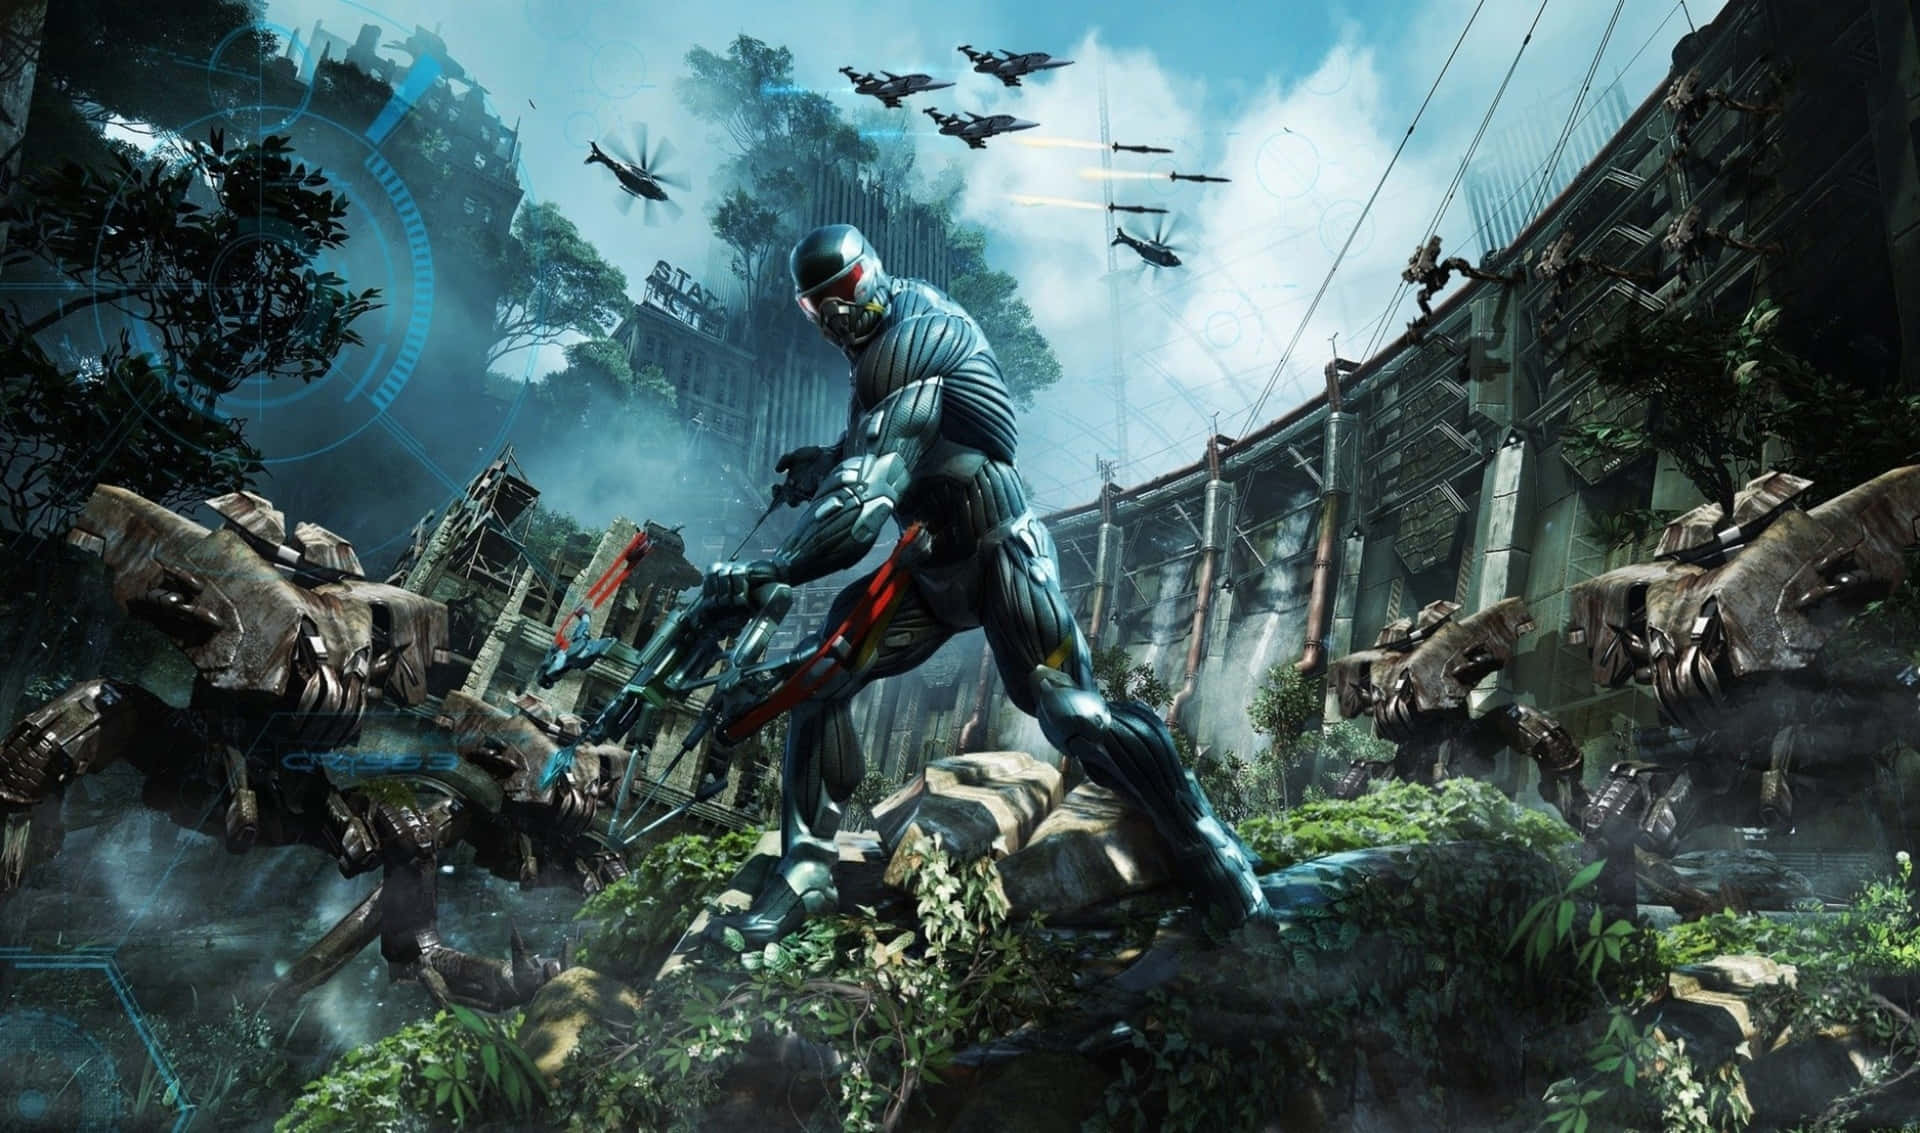 Immerse yourself in the stunning world of Crysis 3